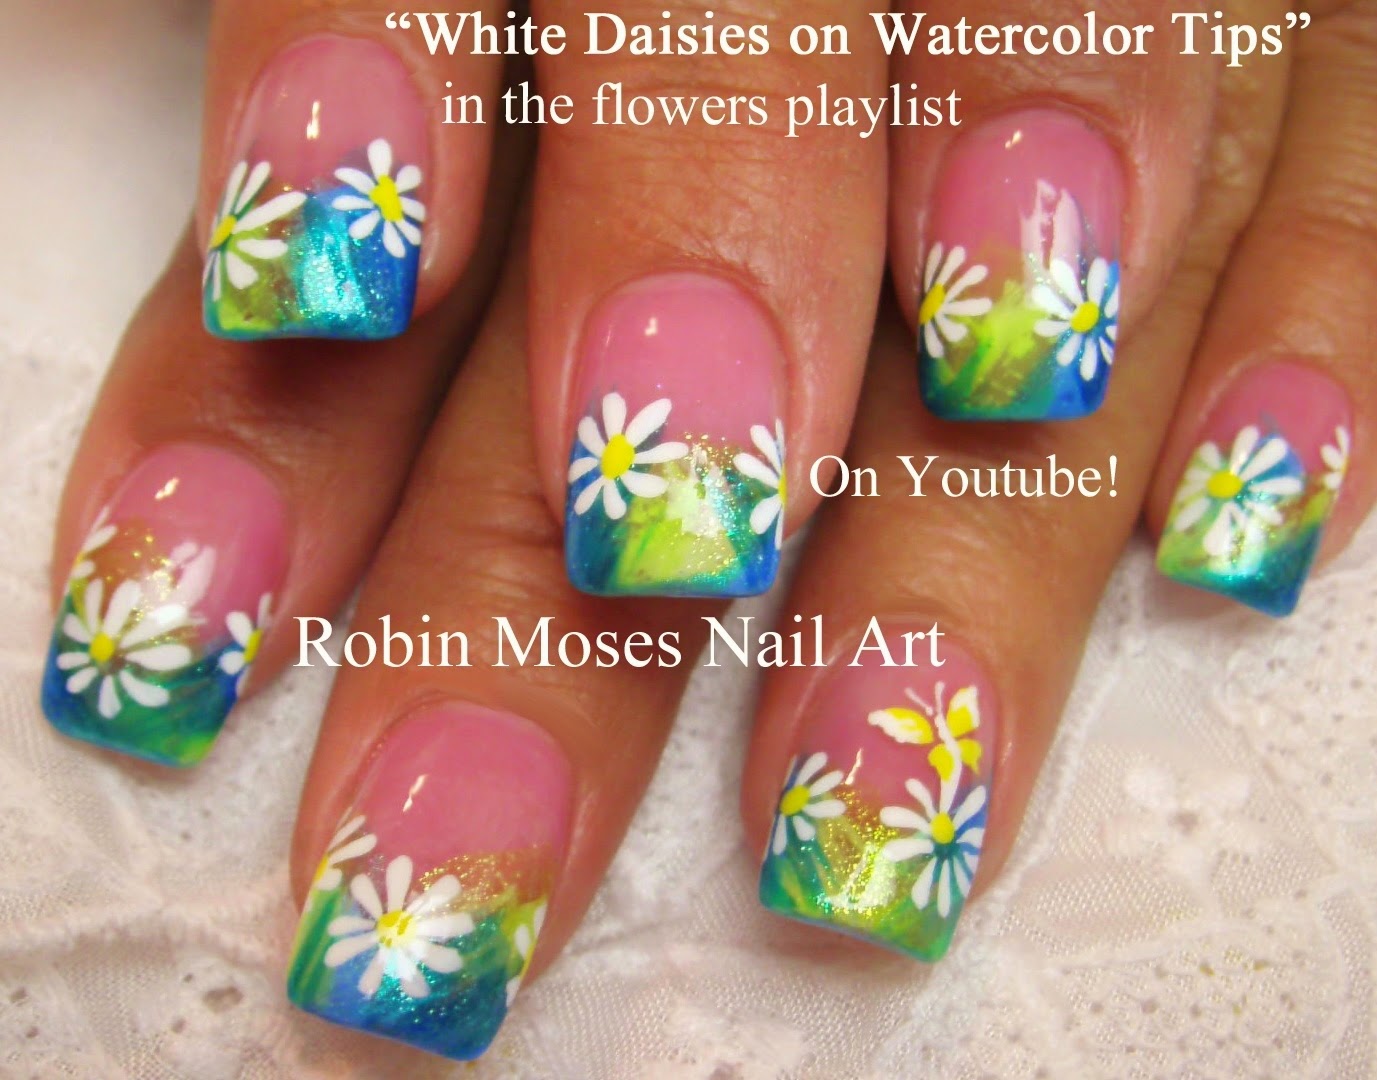 Robin Moses Nail Art - French Pink and White Nails Tutorial - wide 9